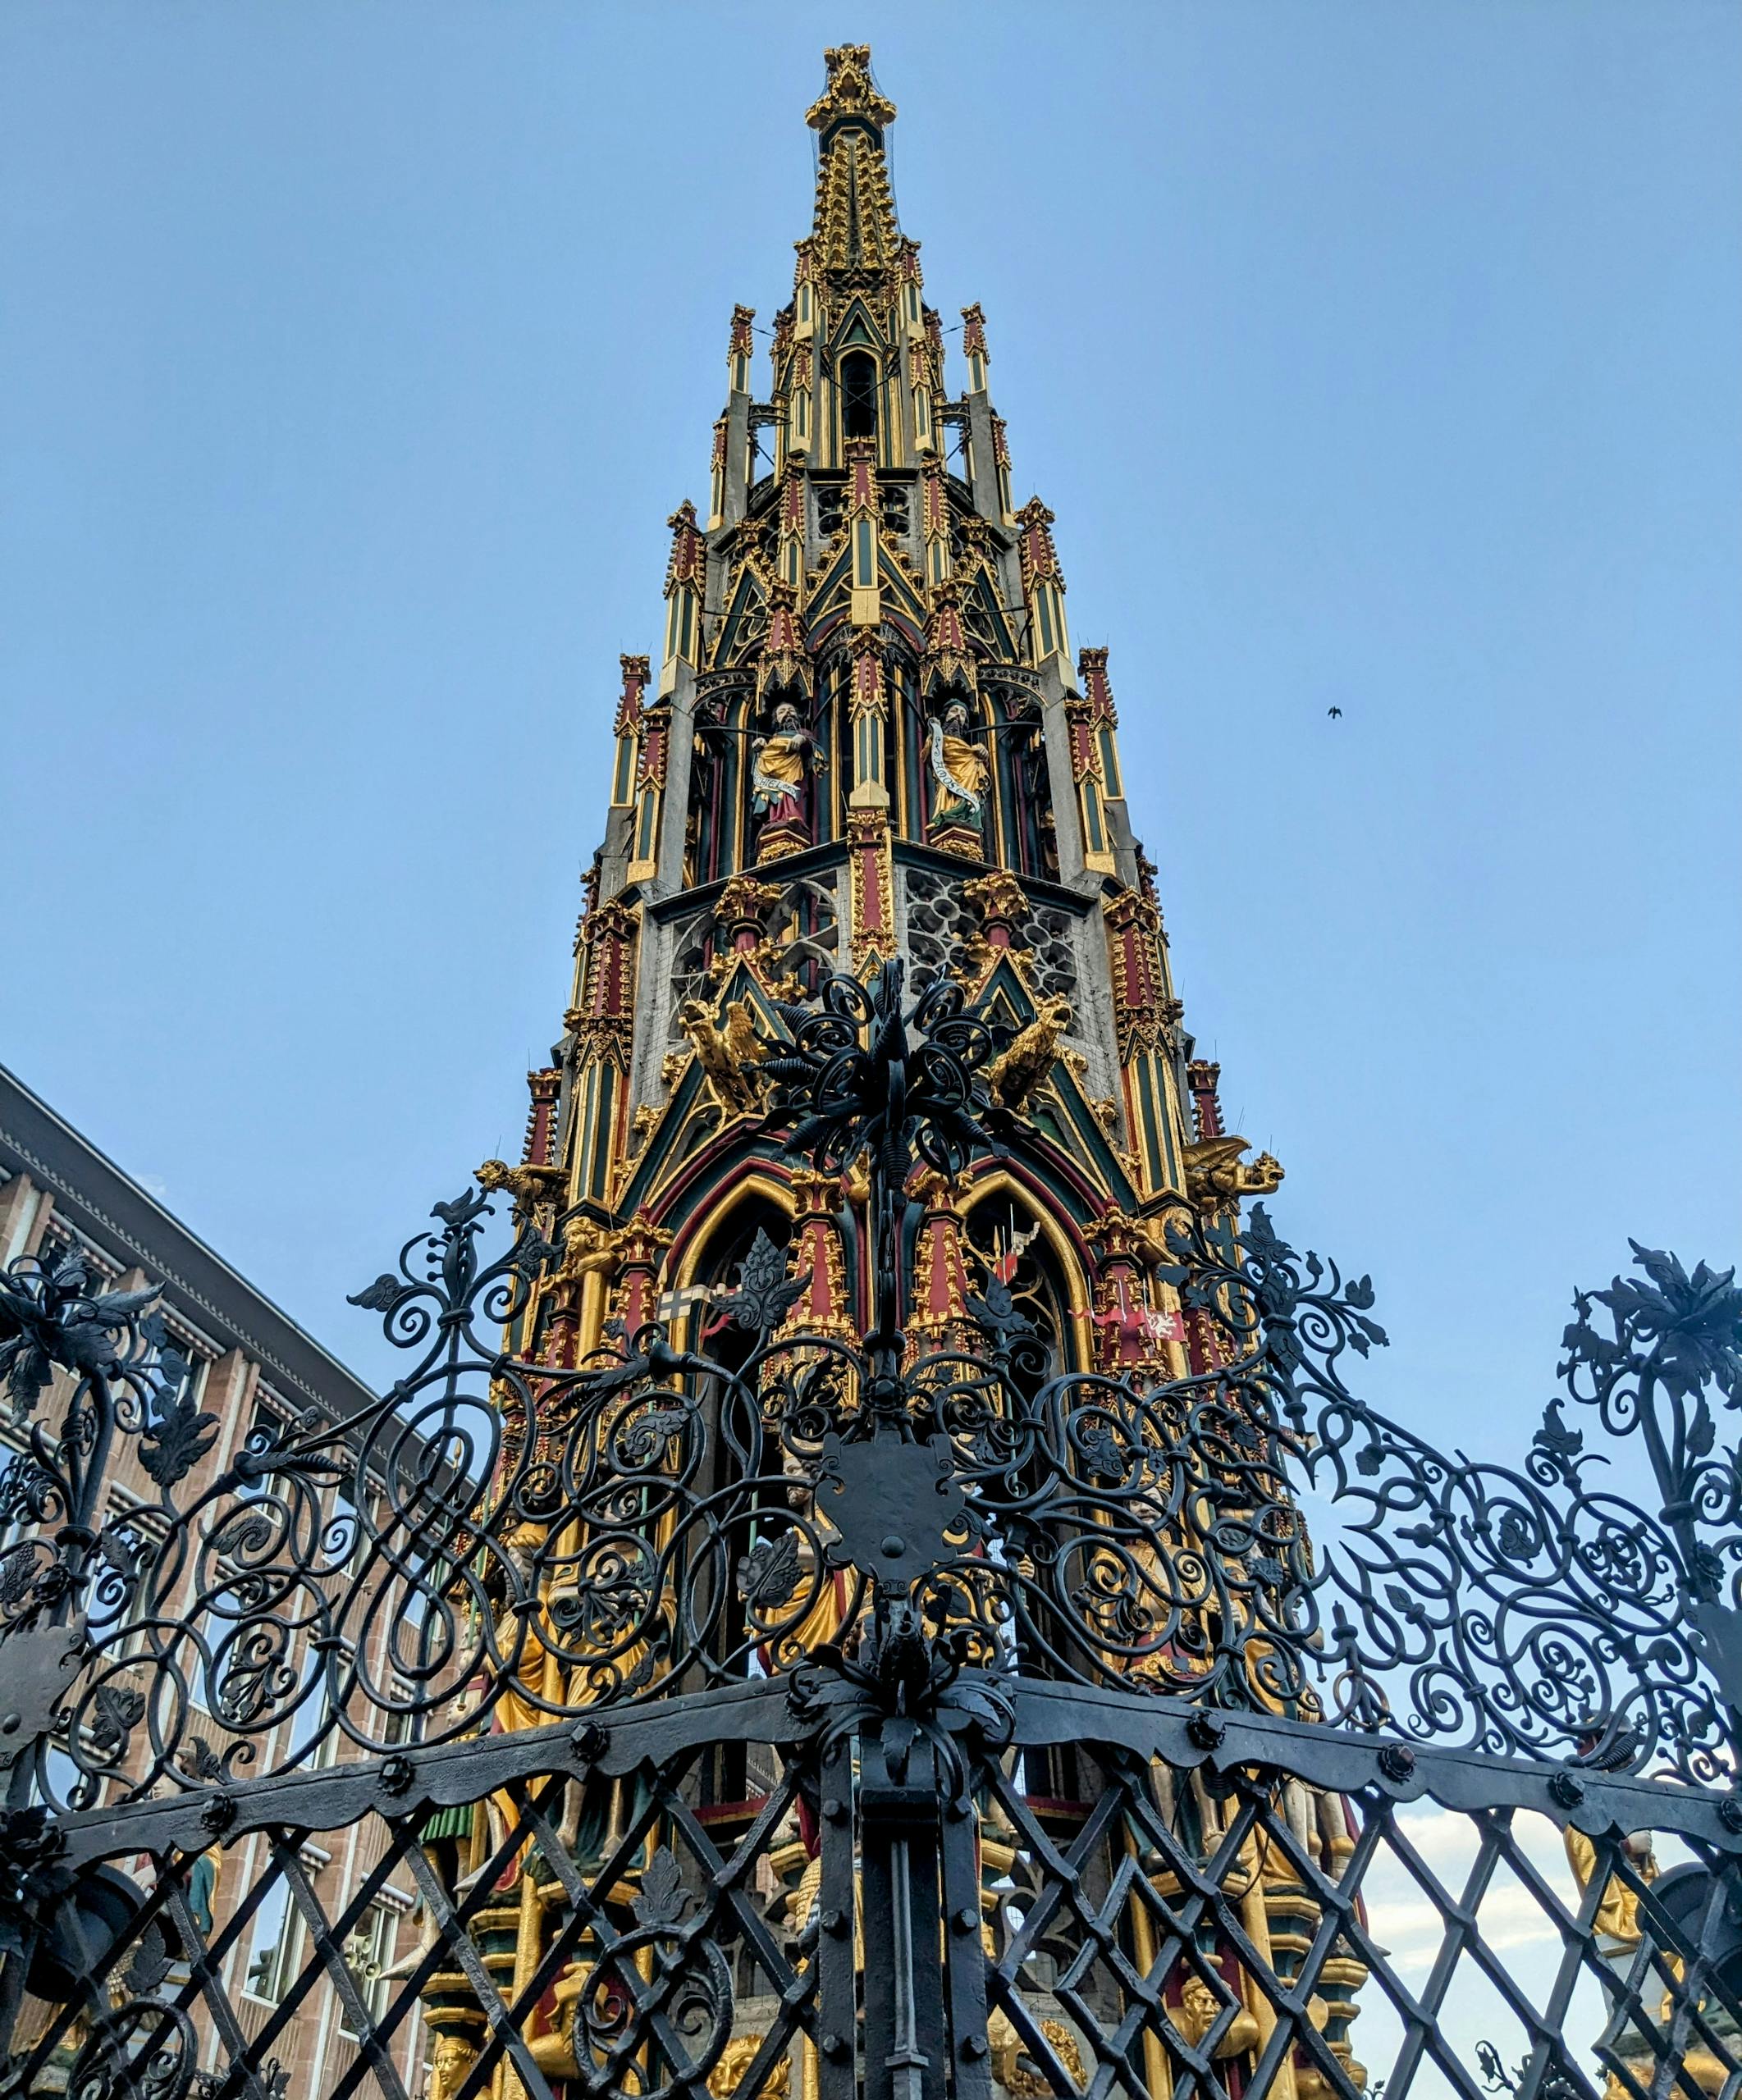 A tall tower with ornate metalwork and a gate